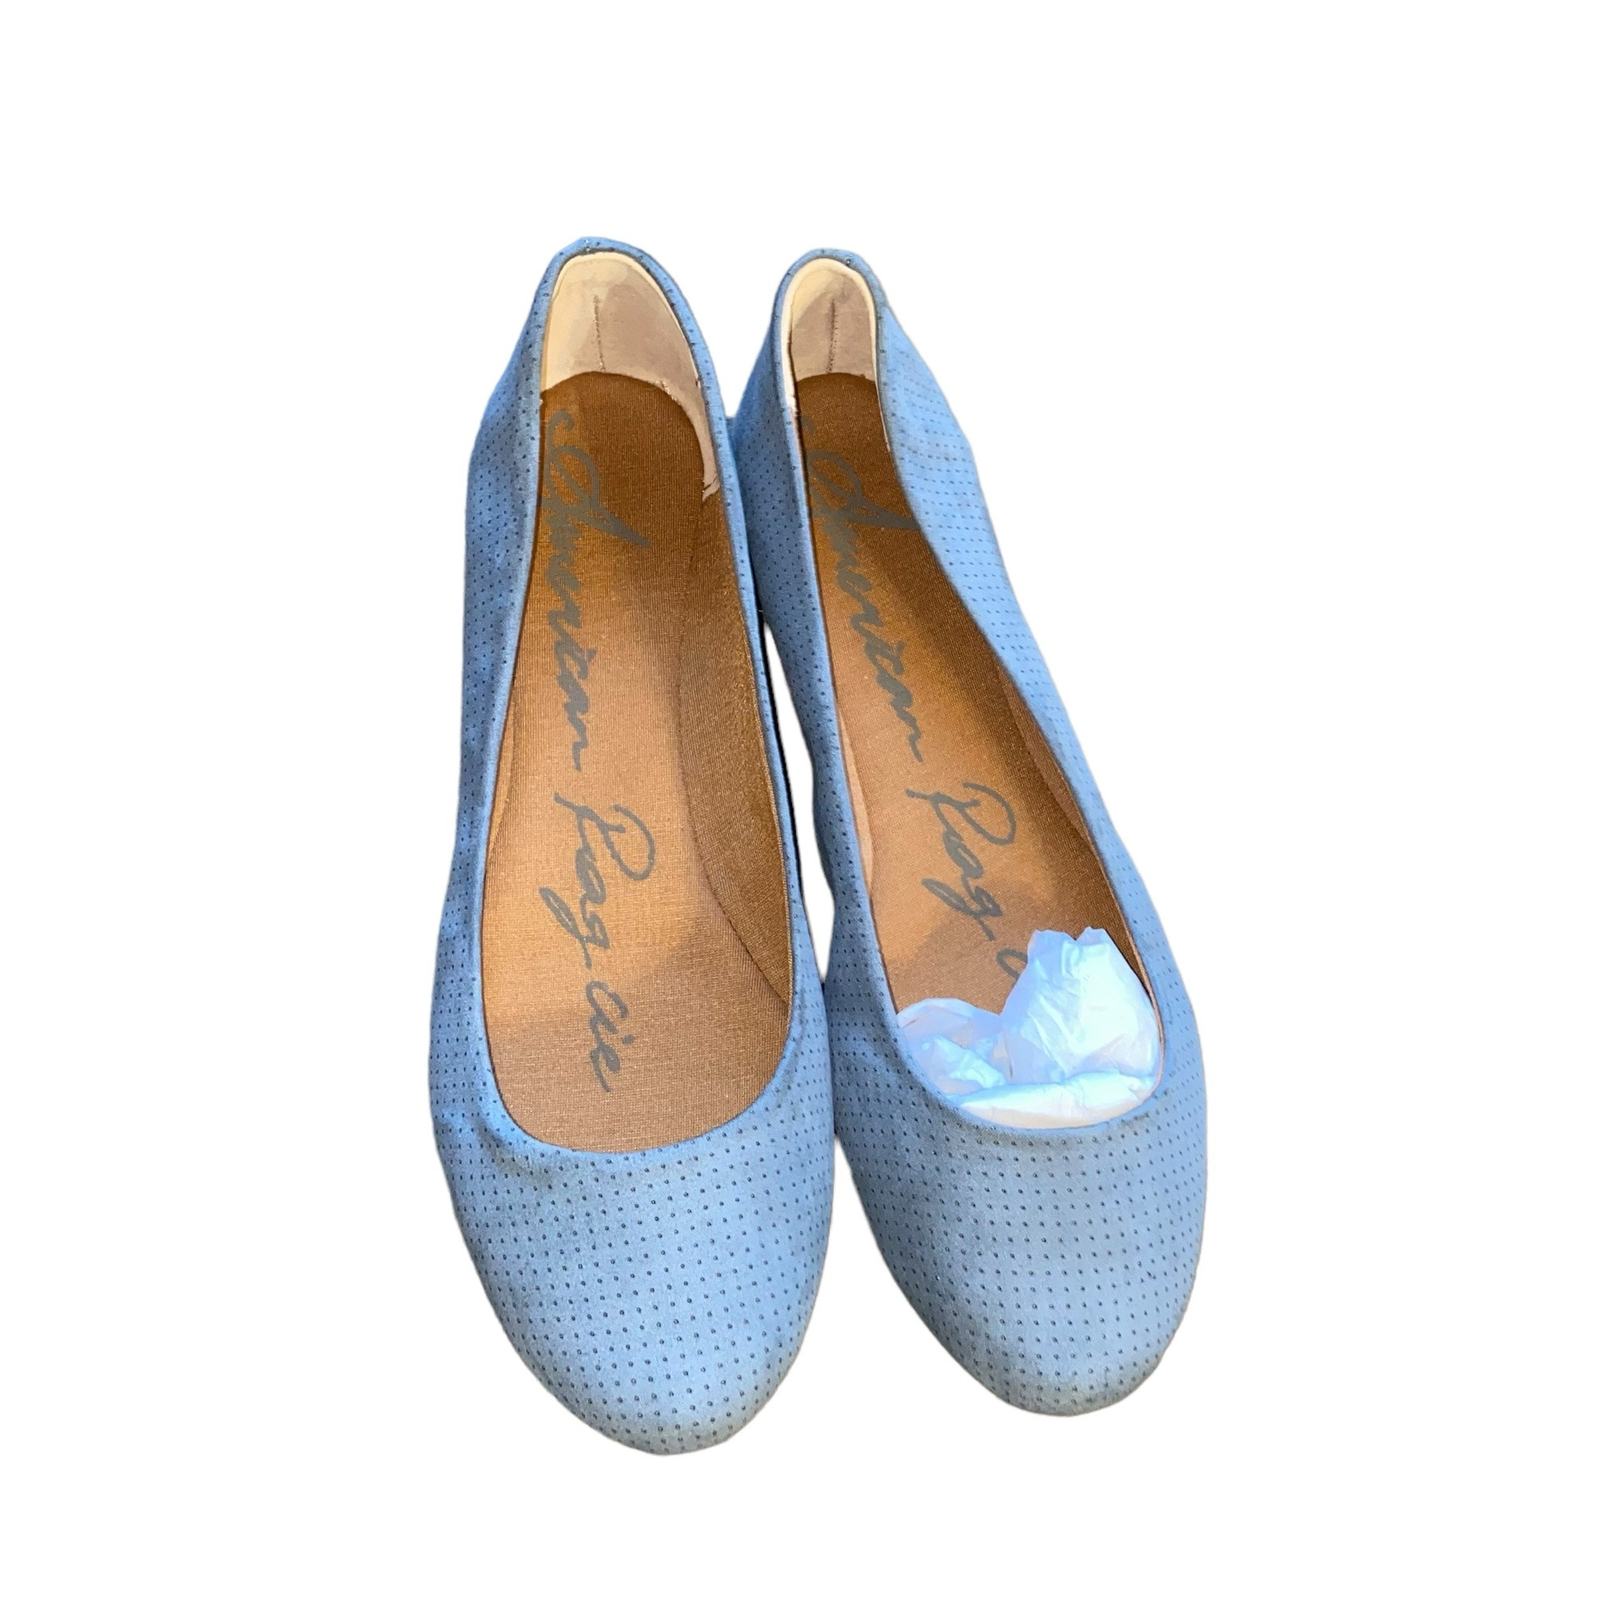 Primary image for American Rag Cie Aellie Perforated Fabric Ballet Flat shoes blue size 11 NEW